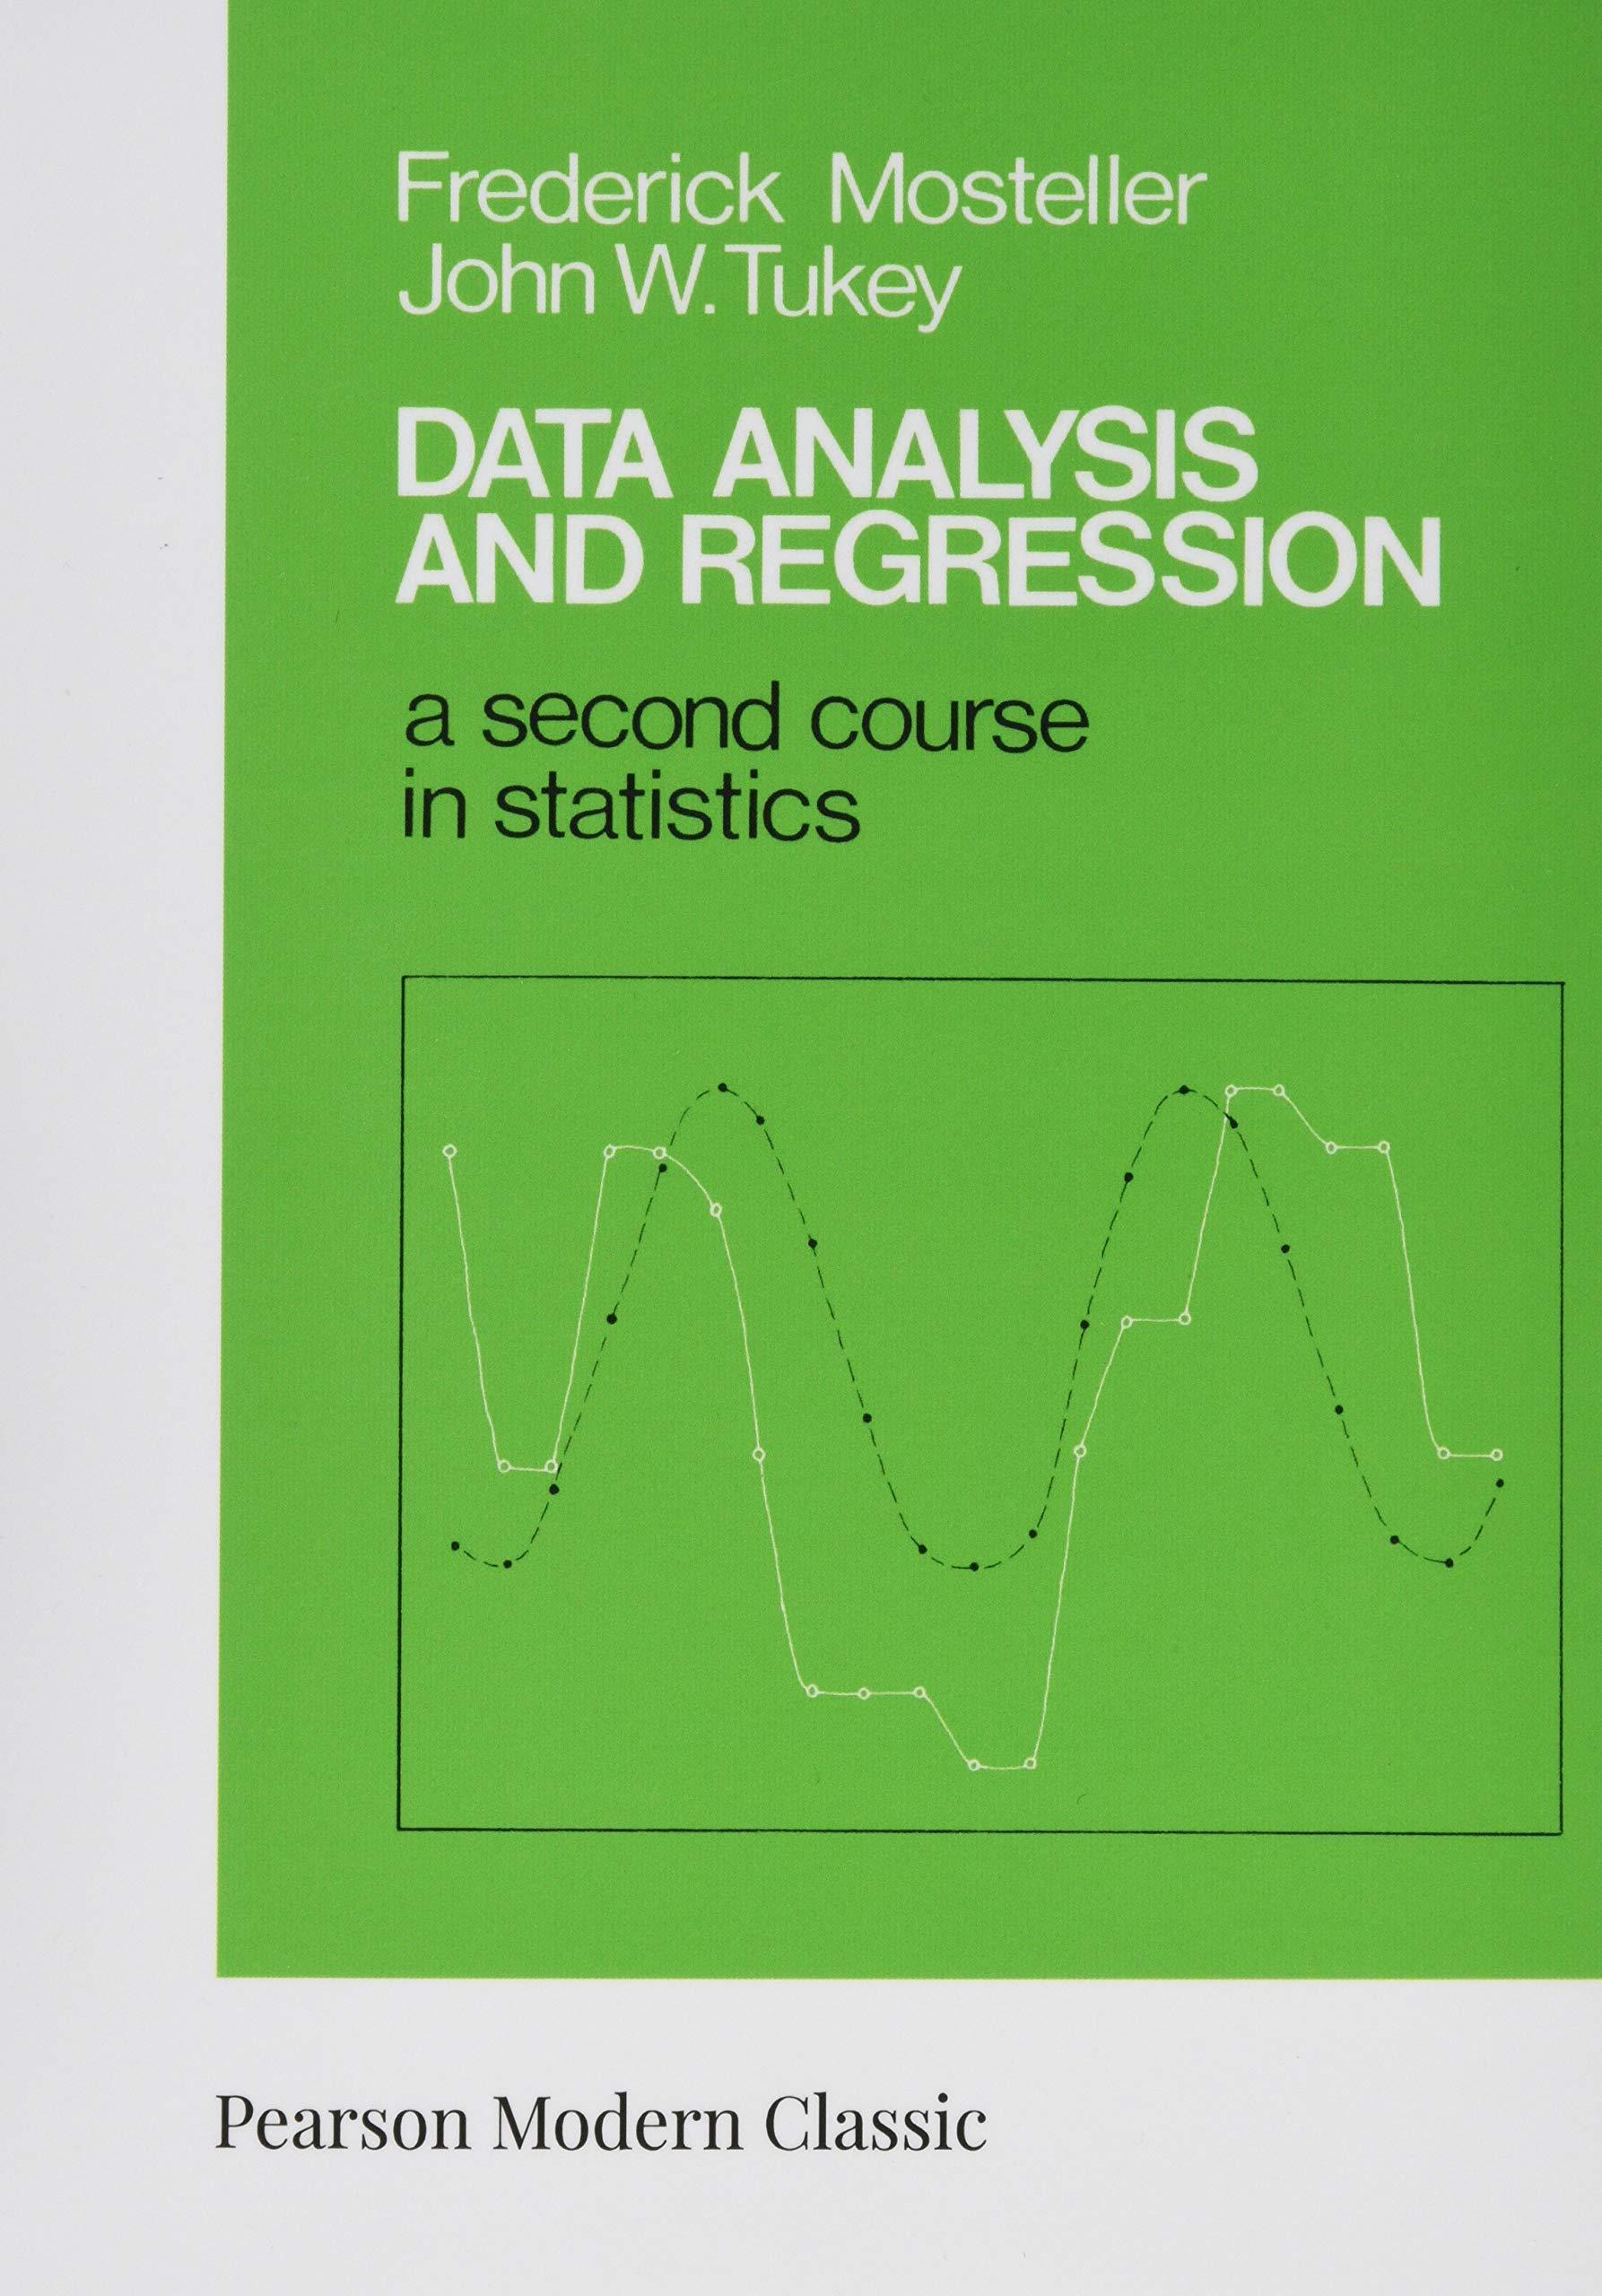 data analysis and regression a second course in statistics 1st edition frederick mosteller, john tukey